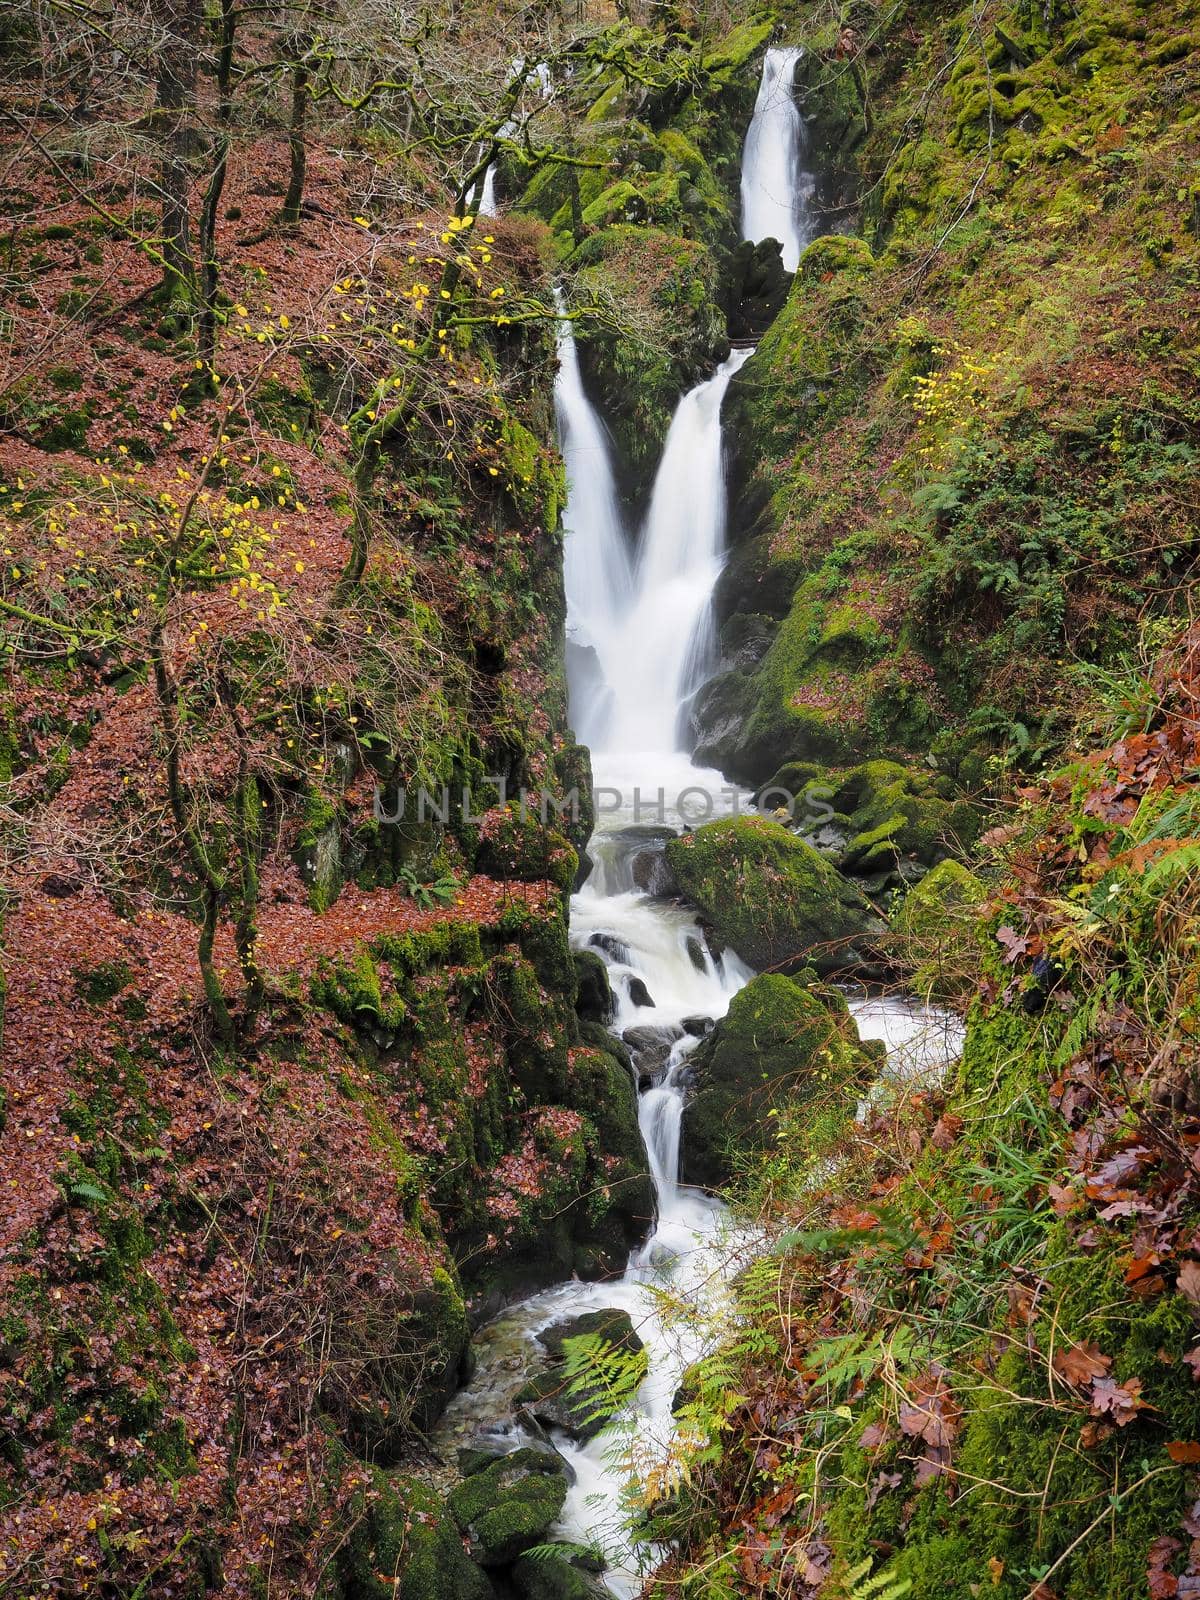 Water cascading down Stock Ghyll Force through colourful Autumn leaves and rocks covered in green moss, near Ambleside, Lake District, UK